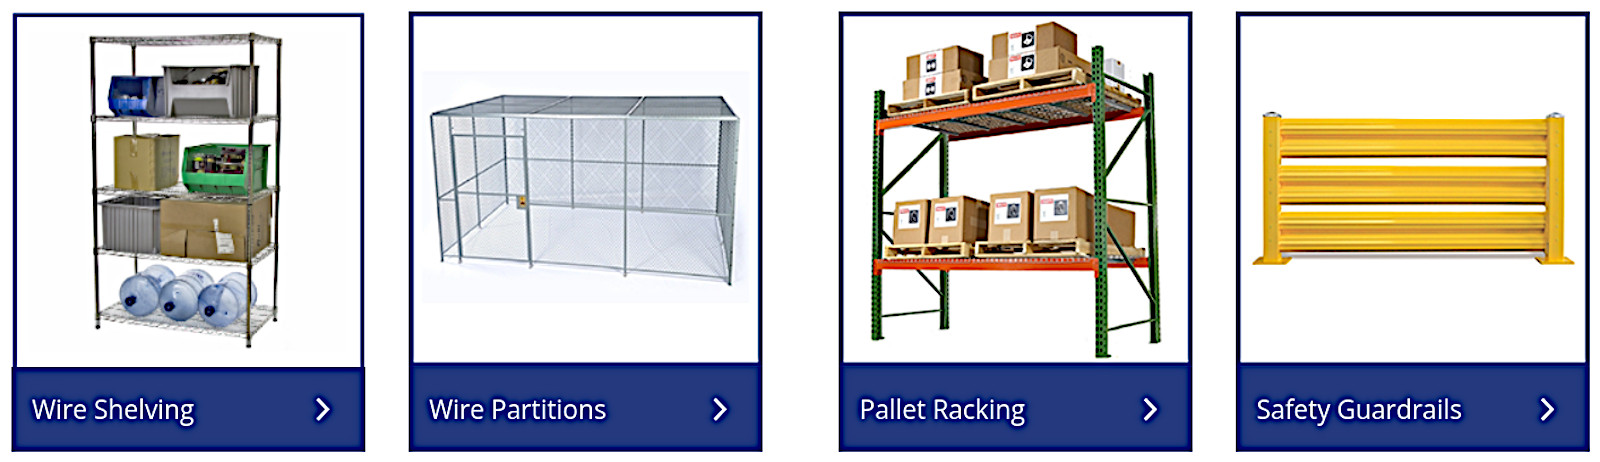 shelves shelving systems clearance price